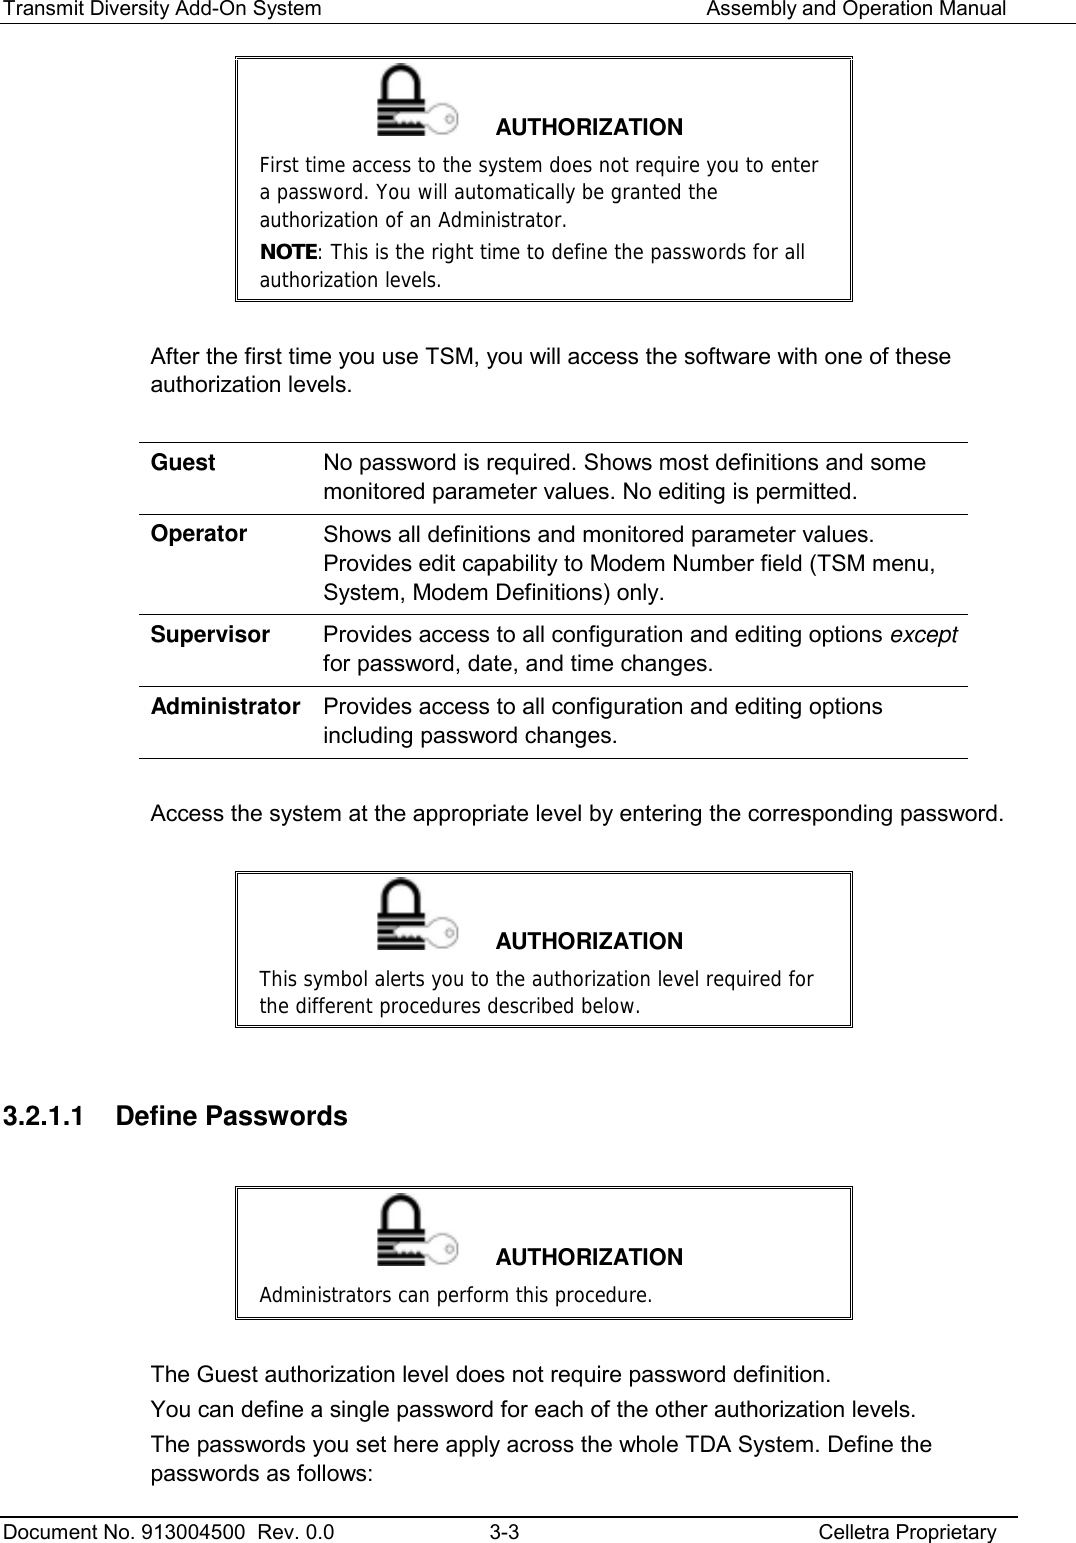 Transmit Diversity Add-On System   Assembly and Operation Manual  Document No. 913004500  Rev. 0.0  3-3  Celletra Proprietary   AUTHORIZATION First time access to the system does not require you to enter a password. You will automatically be granted the authorization of an Administrator. NOTE: This is the right time to define the passwords for all authorization levels.  After the first time you use TSM, you will access the software with one of these authorization levels.  Guest No password is required. Shows most definitions and some monitored parameter values. No editing is permitted. Operator Shows all definitions and monitored parameter values. Provides edit capability to Modem Number field (TSM menu, System, Modem Definitions) only. Supervisor Provides access to all configuration and editing options except for password, date, and time changes. Administrator Provides access to all configuration and editing options including password changes.  Access the system at the appropriate level by entering the corresponding password.     AUTHORIZATION This symbol alerts you to the authorization level required for the different procedures described below.  3.2.1.1 Define Passwords   AUTHORIZATION Administrators can perform this procedure.   The Guest authorization level does not require password definition.  You can define a single password for each of the other authorization levels.  The passwords you set here apply across the whole TDA System. Define the passwords as follows: 